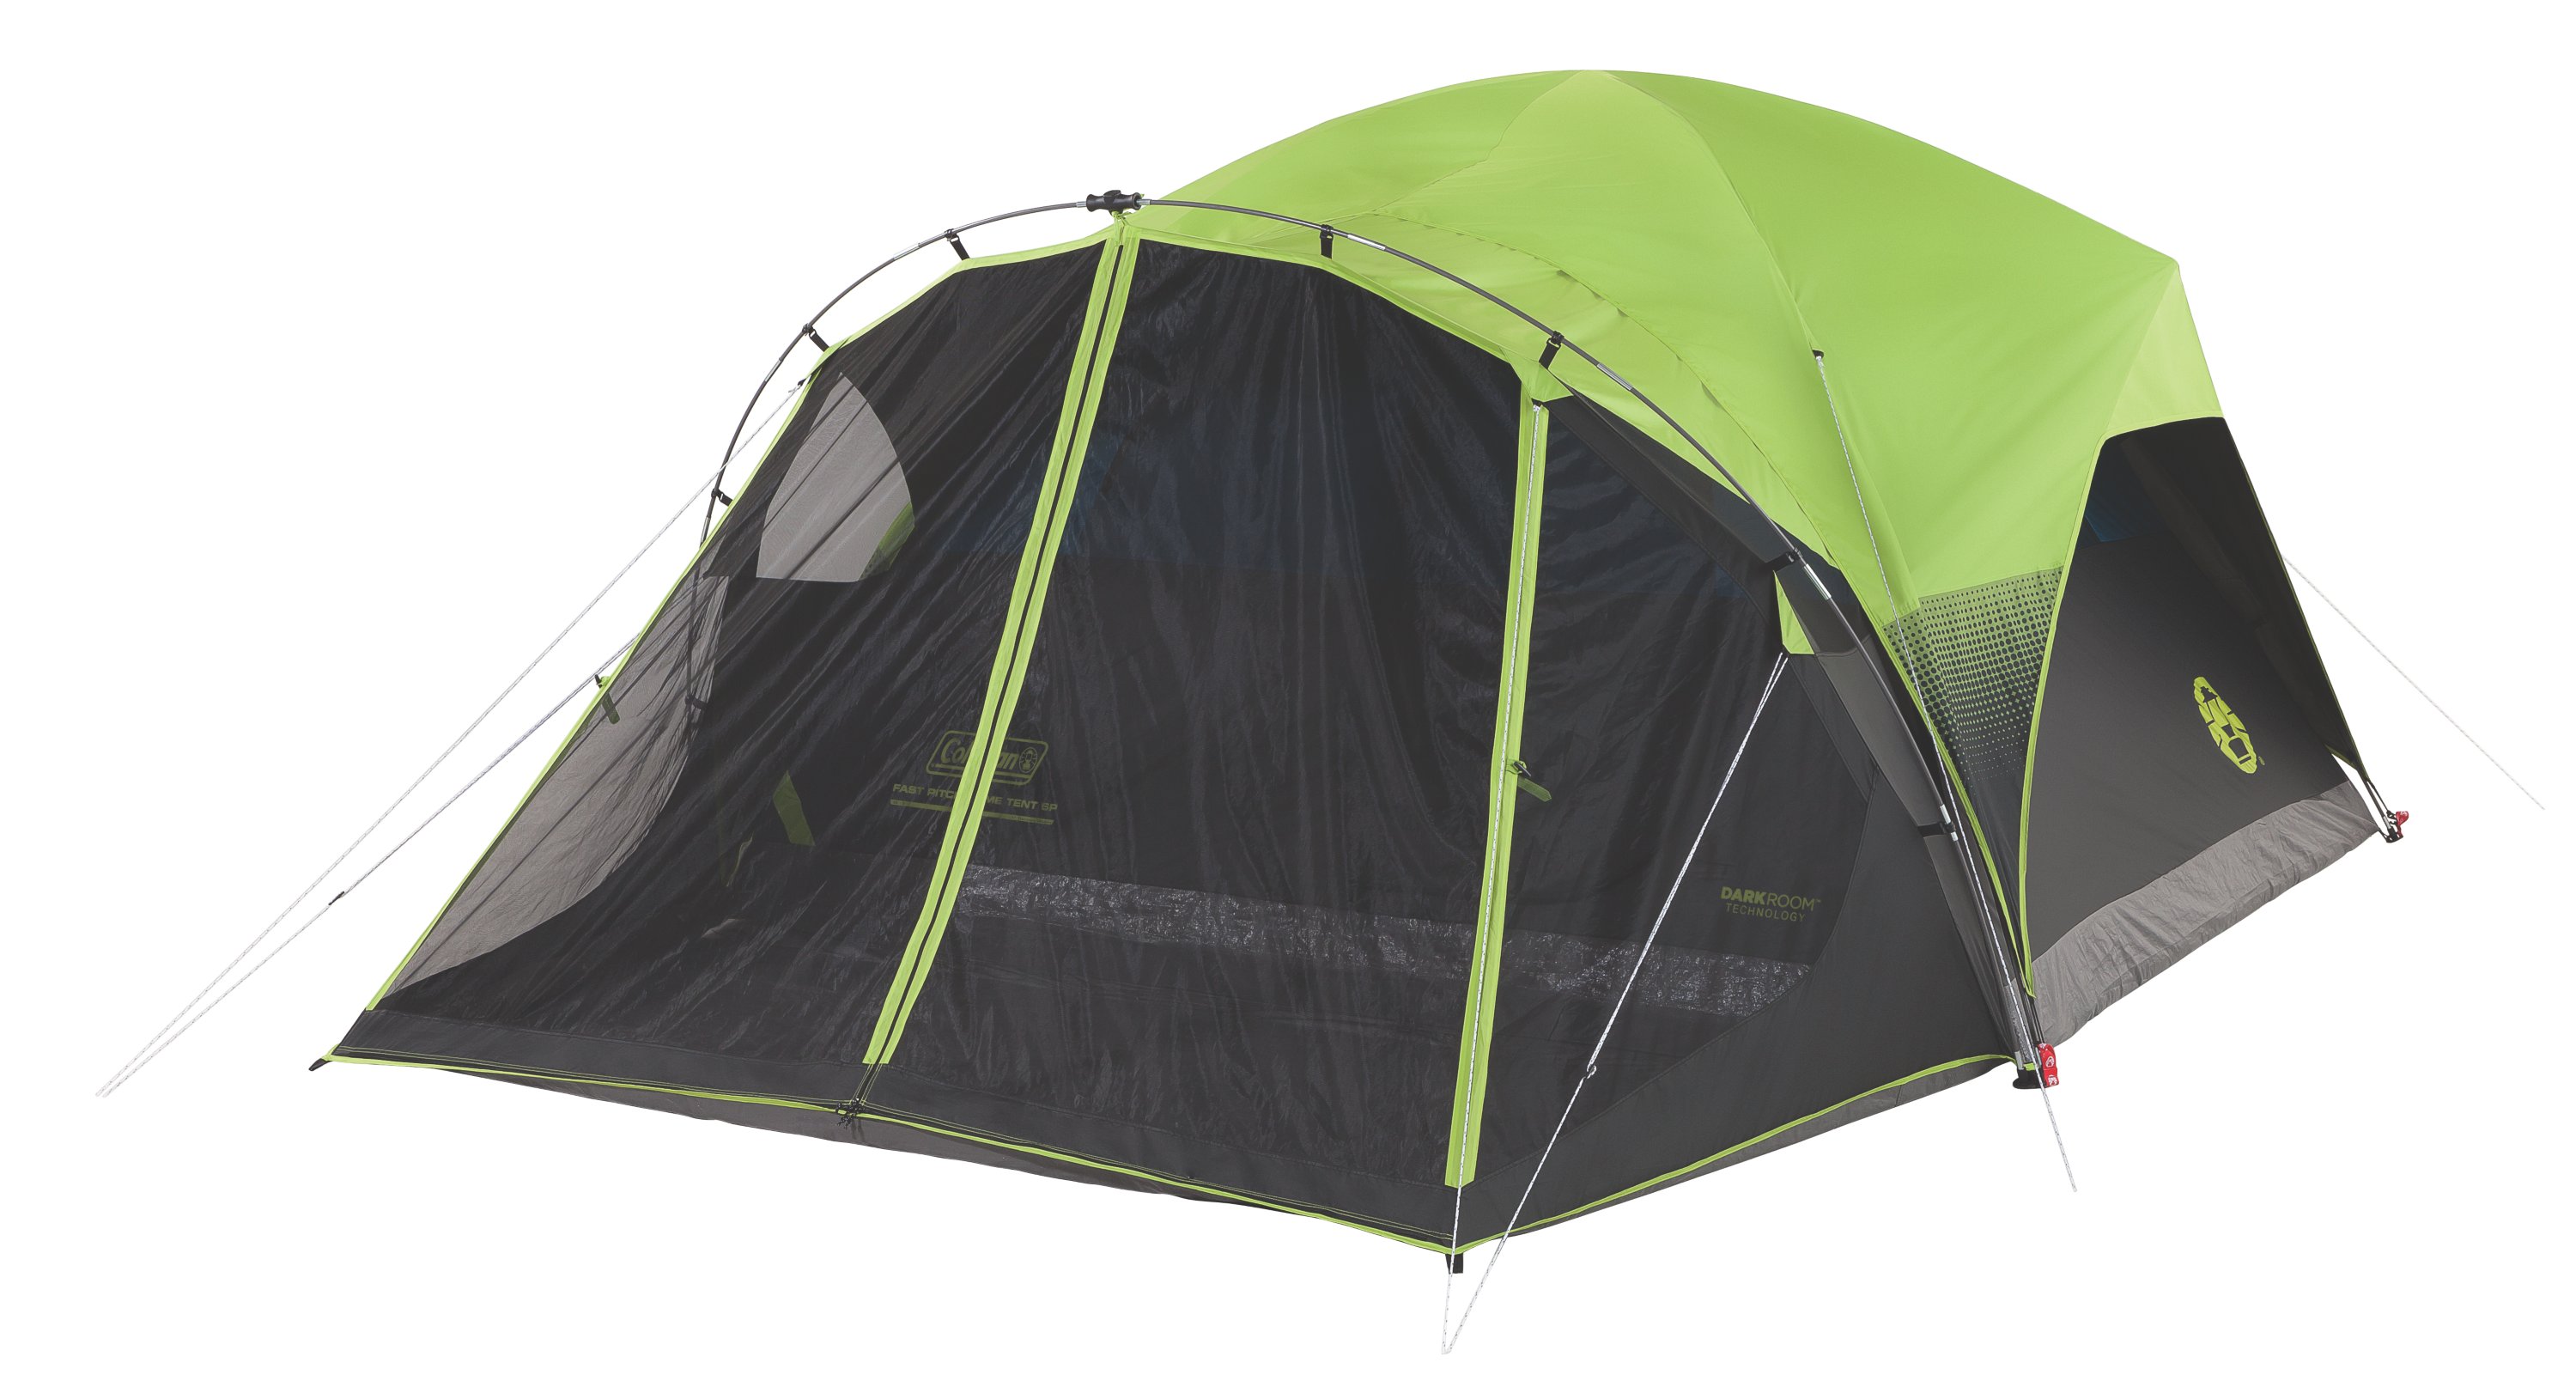 6-Person Dark Room Fast Pitch Dome Tent with Screen Room Coleman